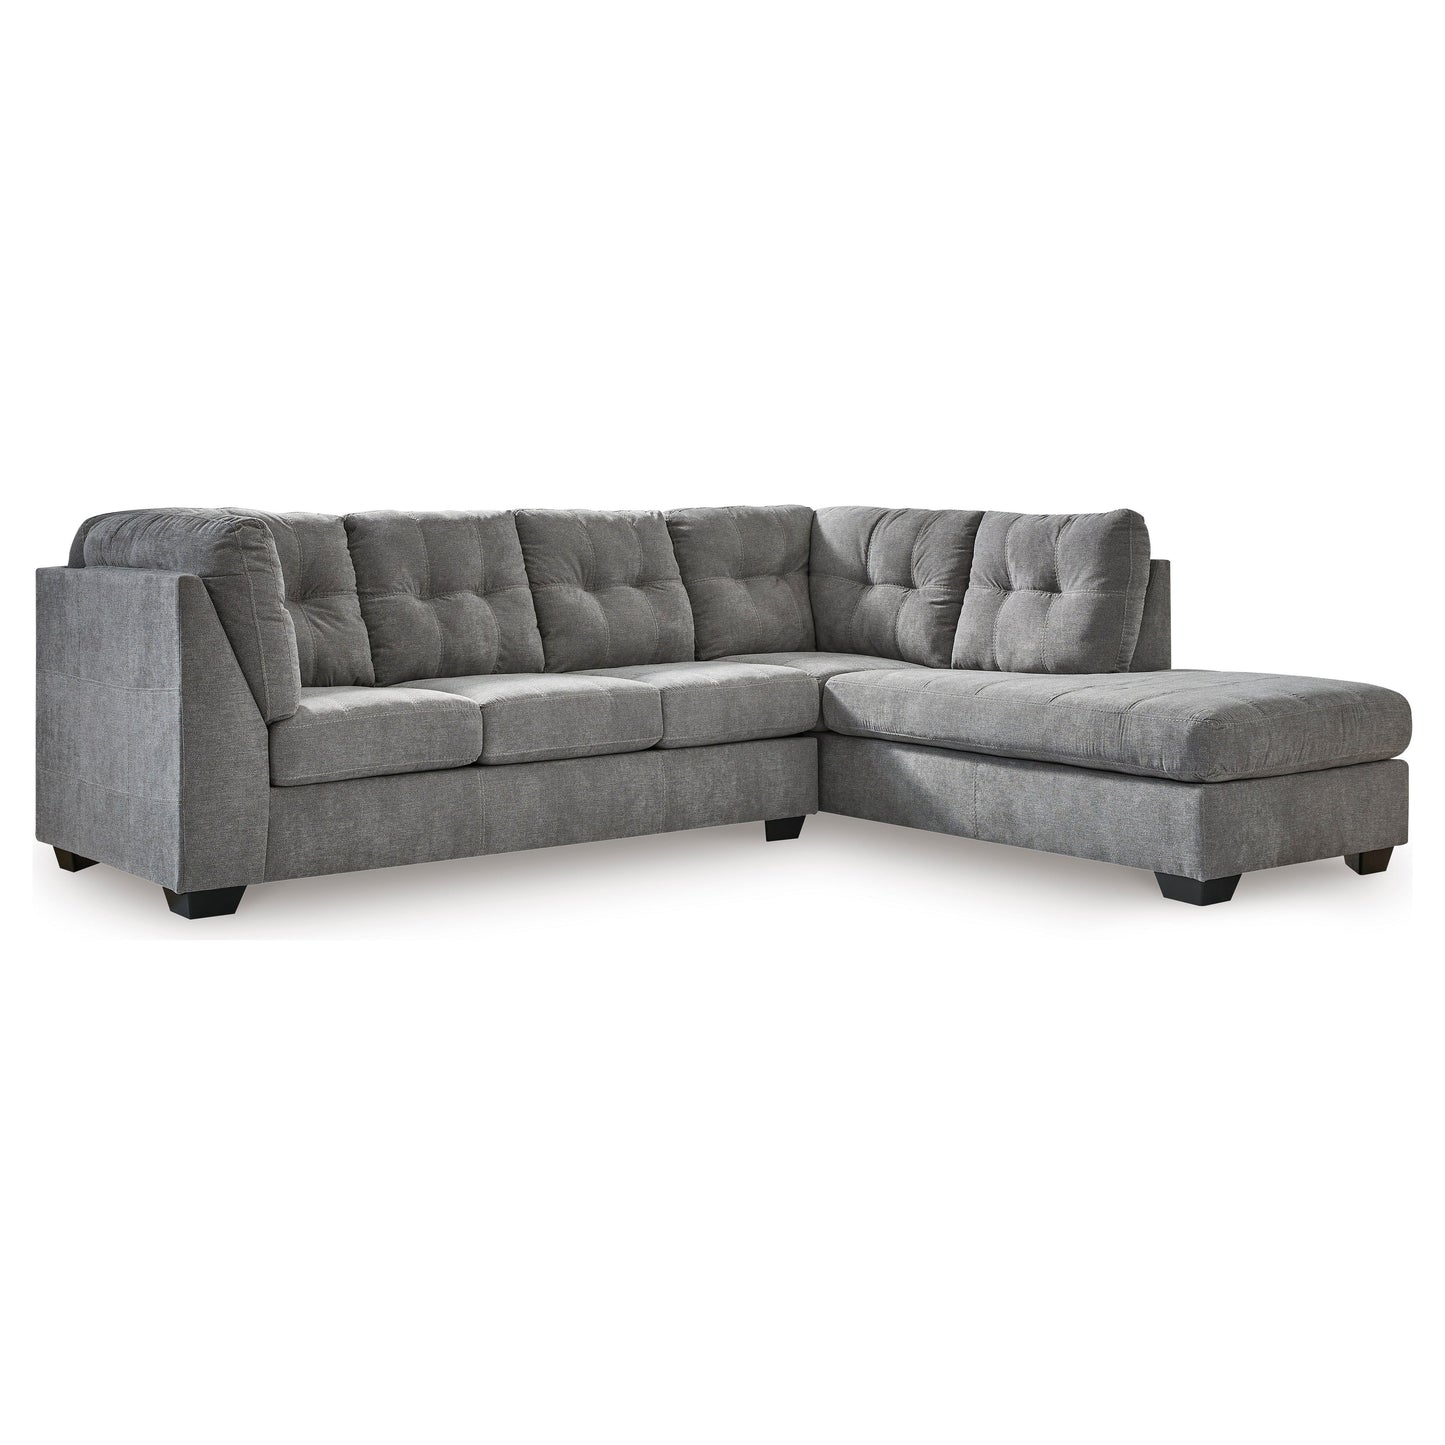 MARLETON 2 PIECE SECTIONAL - GRAY